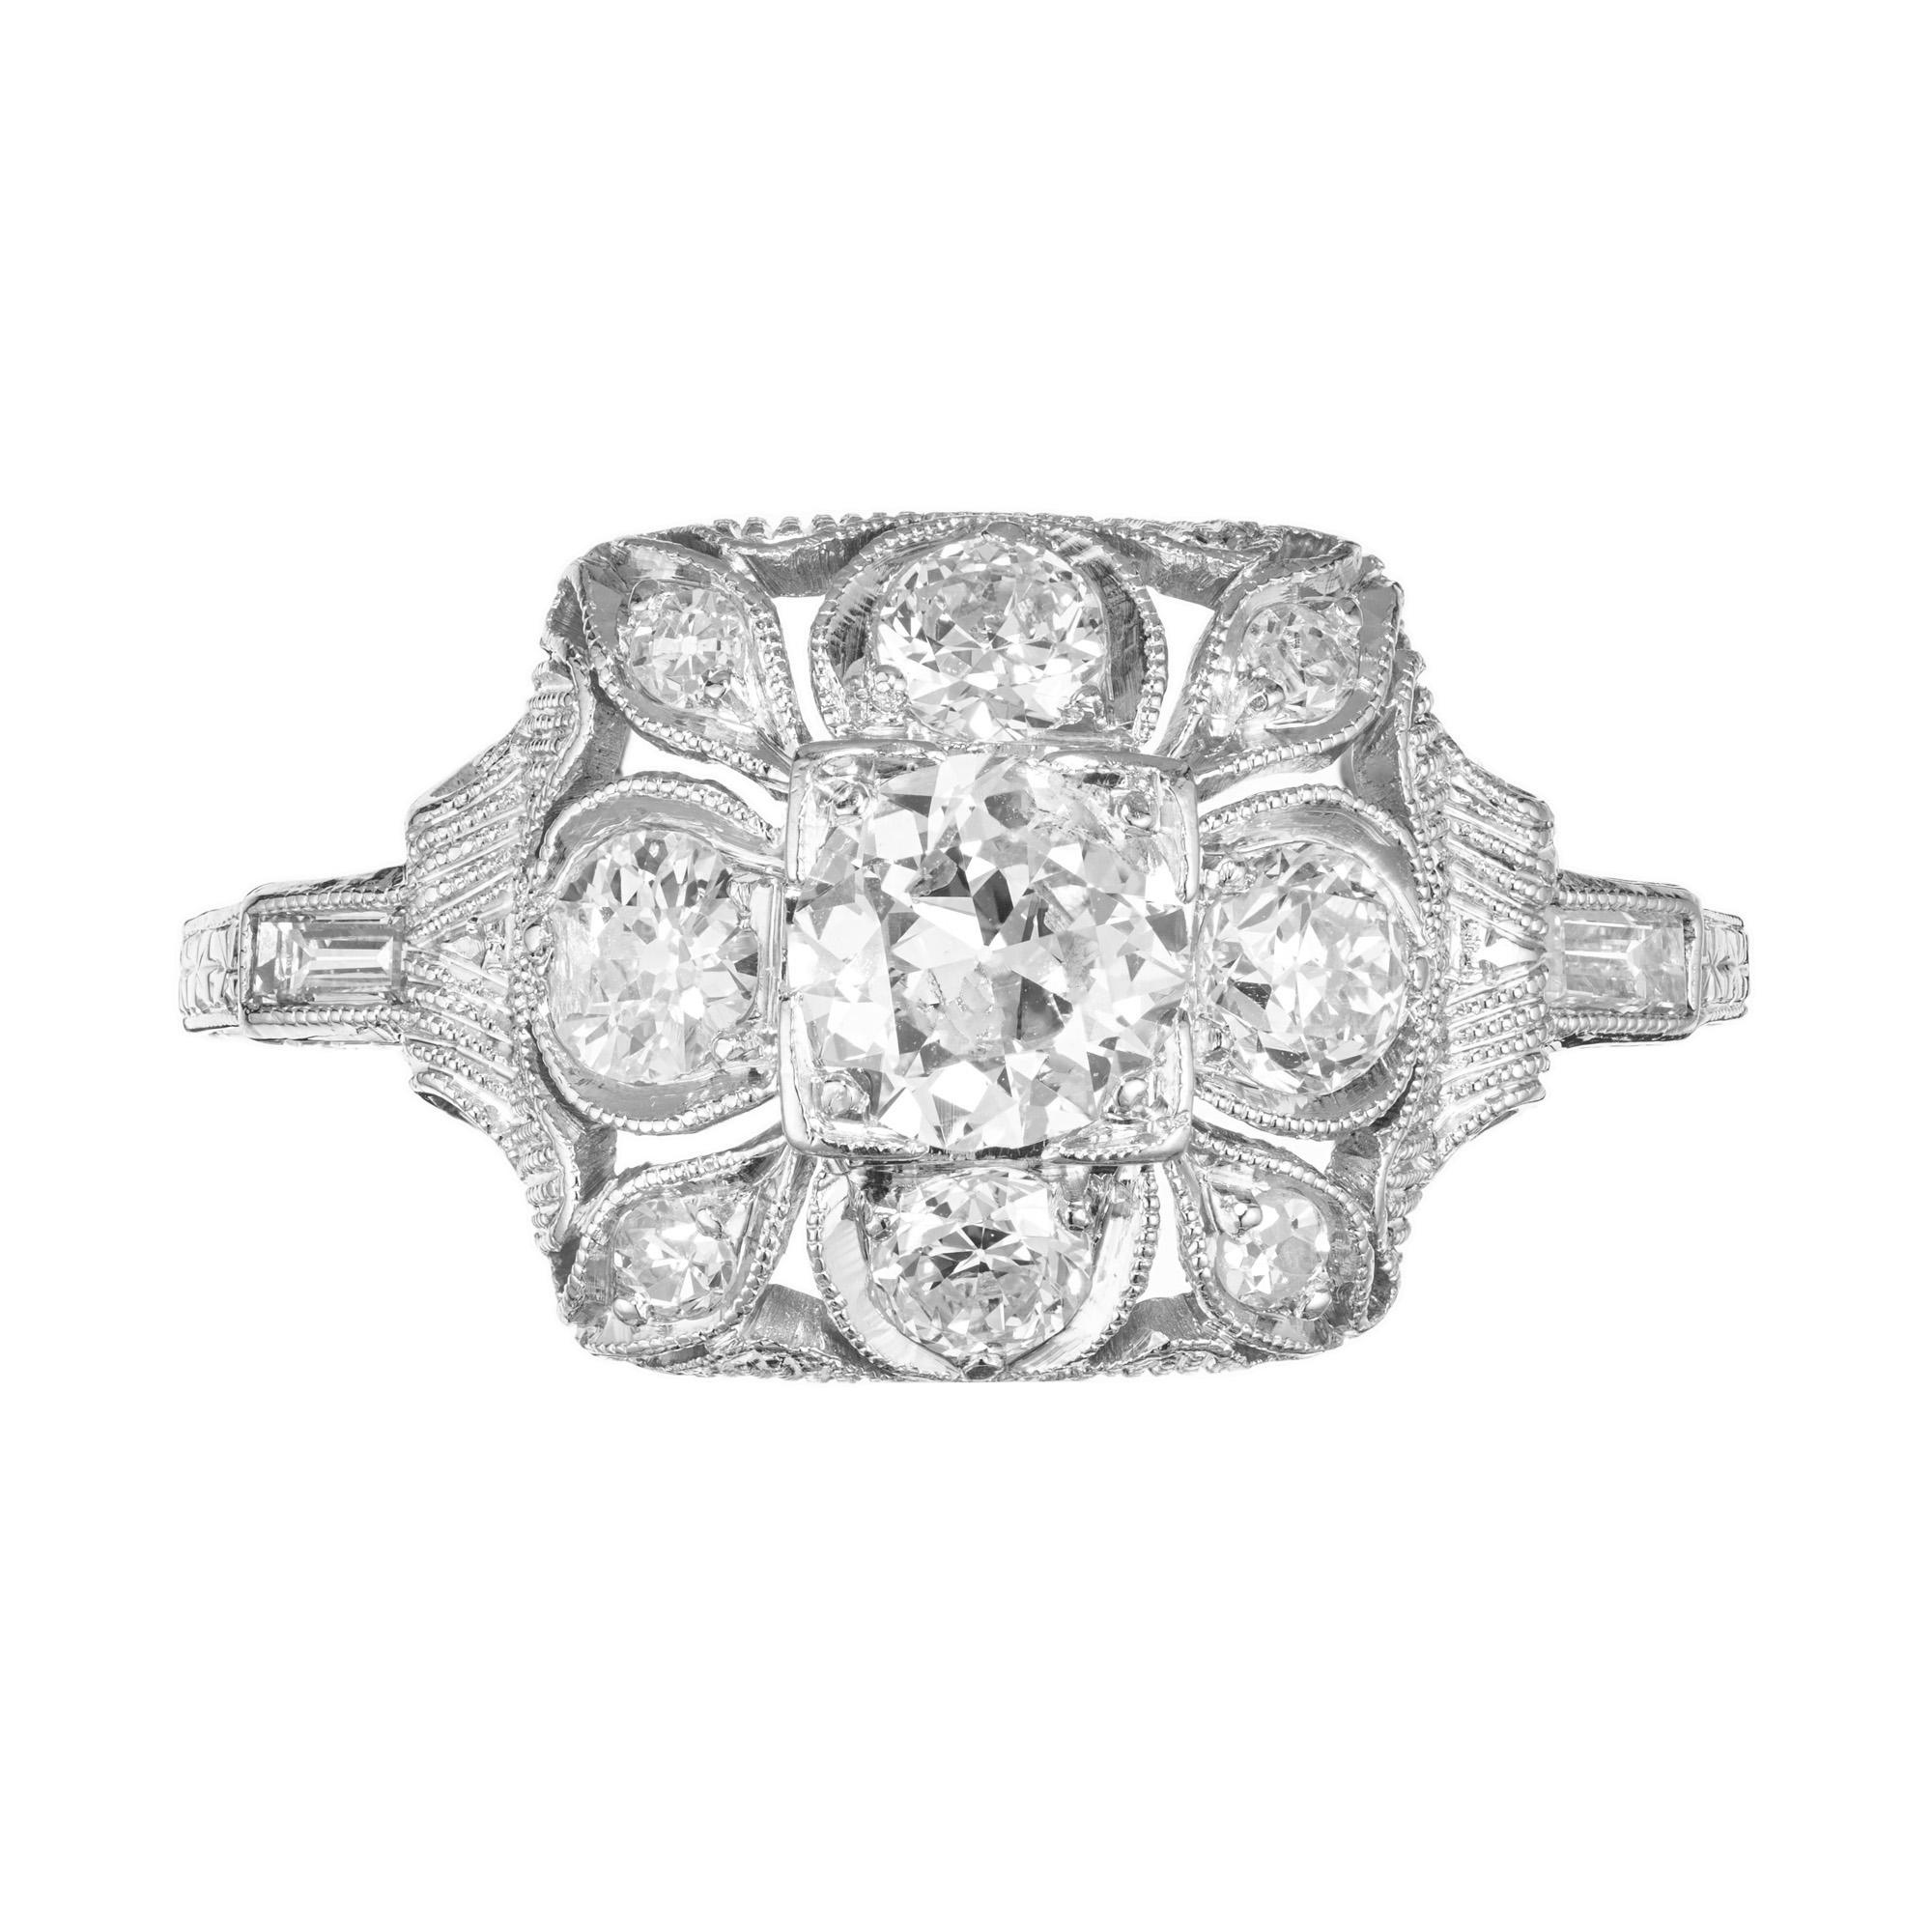 1910 vintage antique diamond engagement ring. A trip back in time, this beautiful open work platinum engagement ring setting has a .50ct Old European center stone accented with 8 Old European cut diamonds and a straight baguette diamond on each